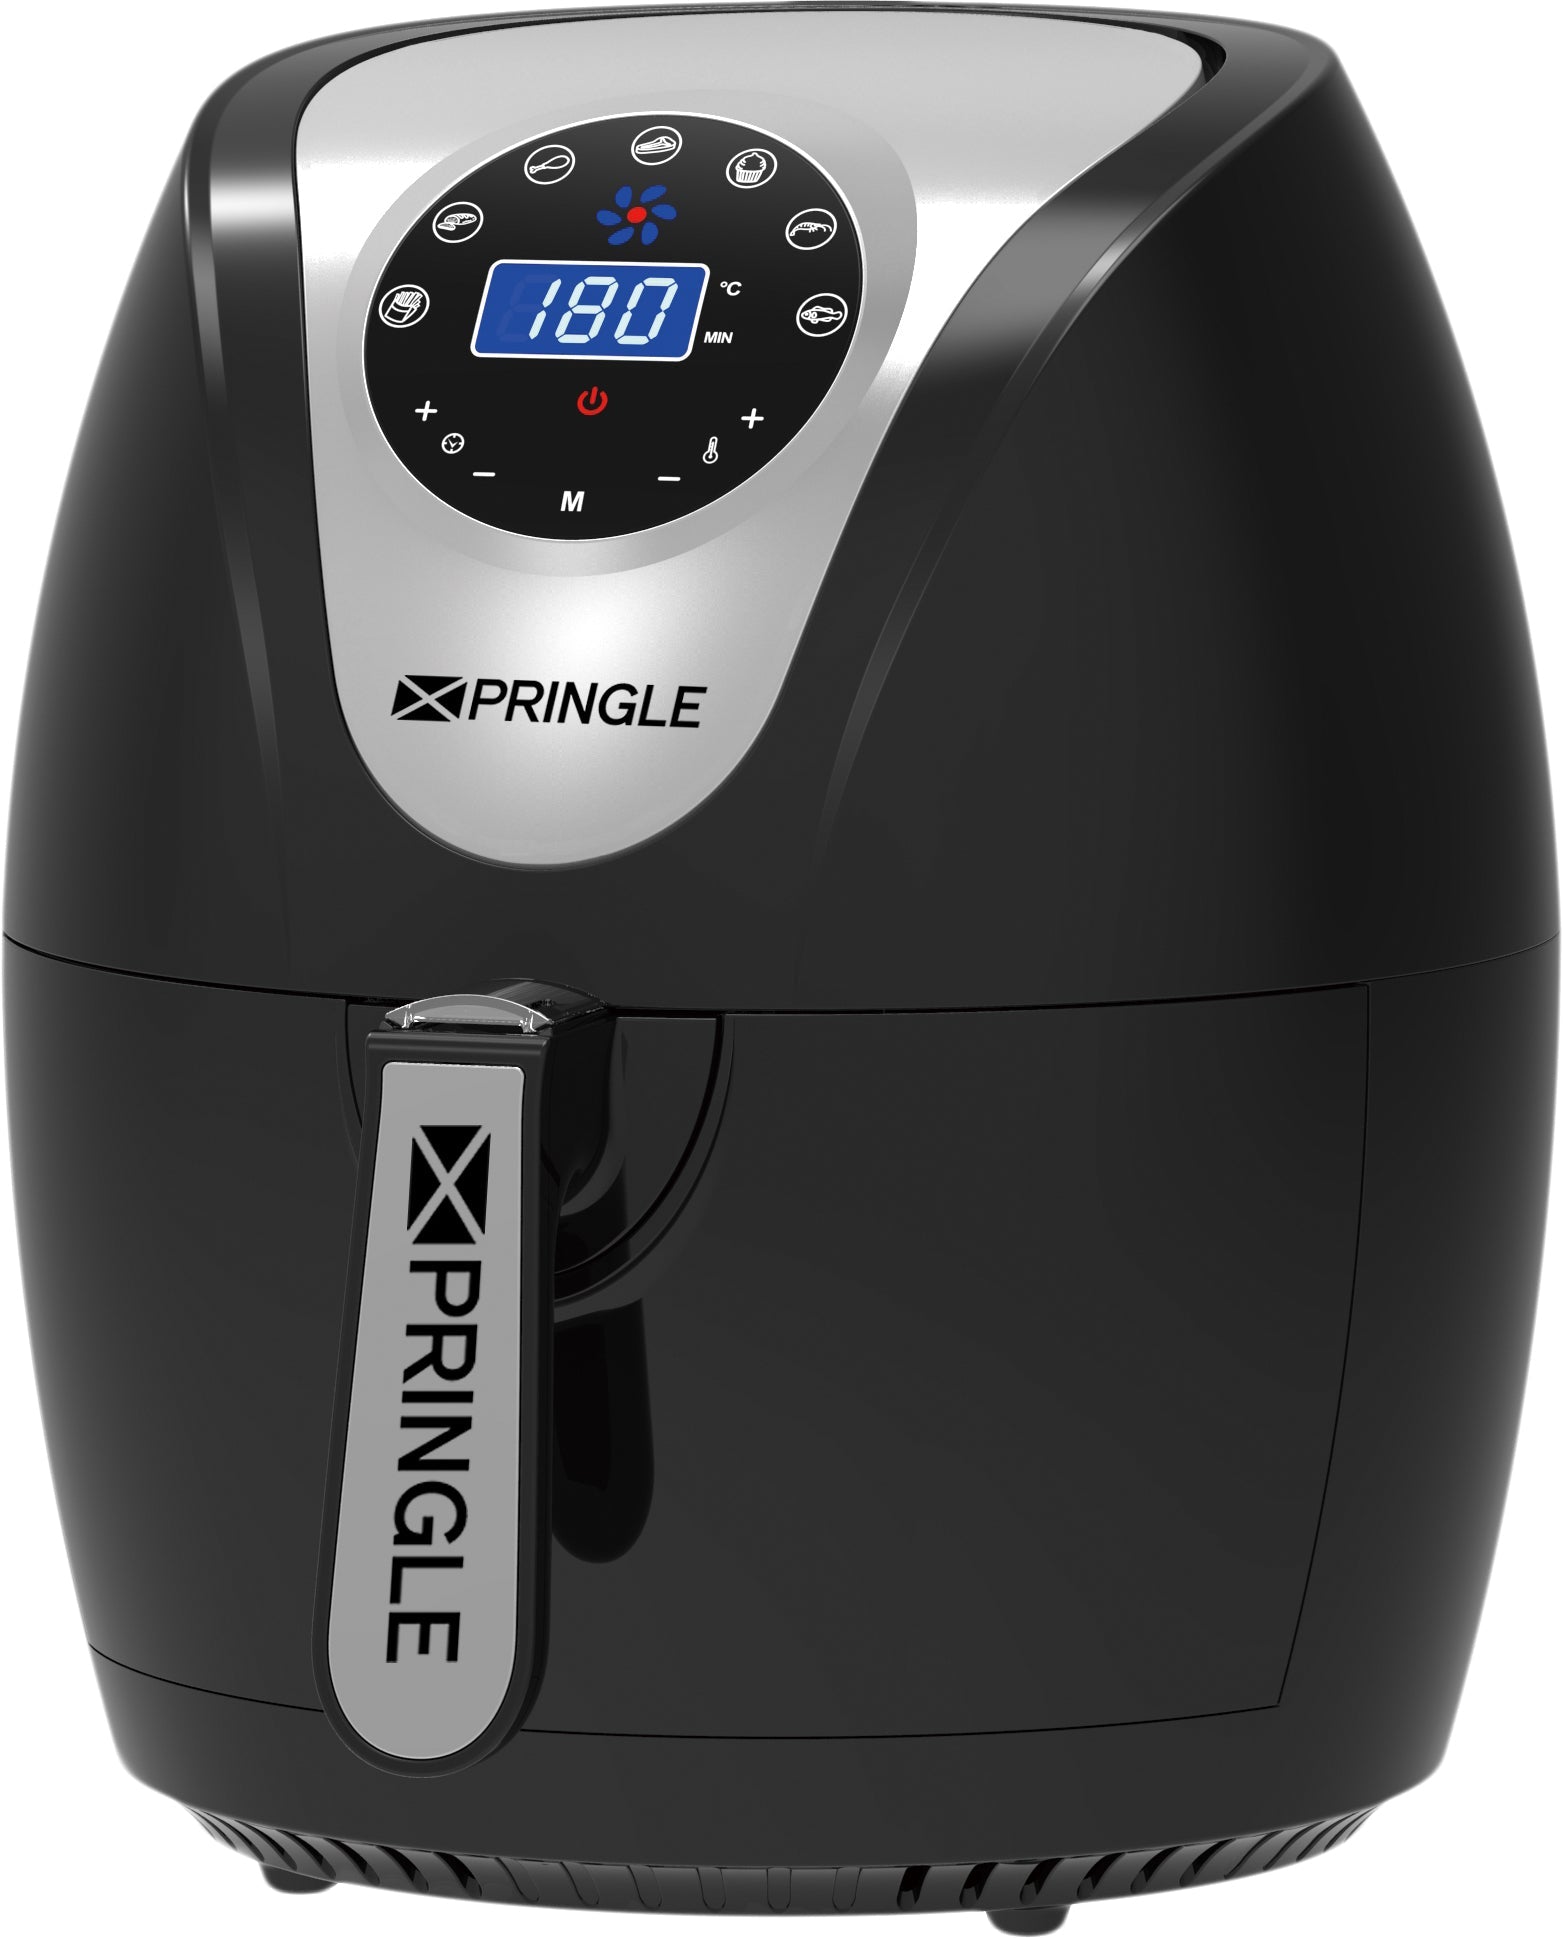 Pringle 4.5L Digital Air Fryer with 360 degree 3D rapid hot air circulation technology with beautiful touch panel display 1400 watt power (Black) - Pringle Appliances